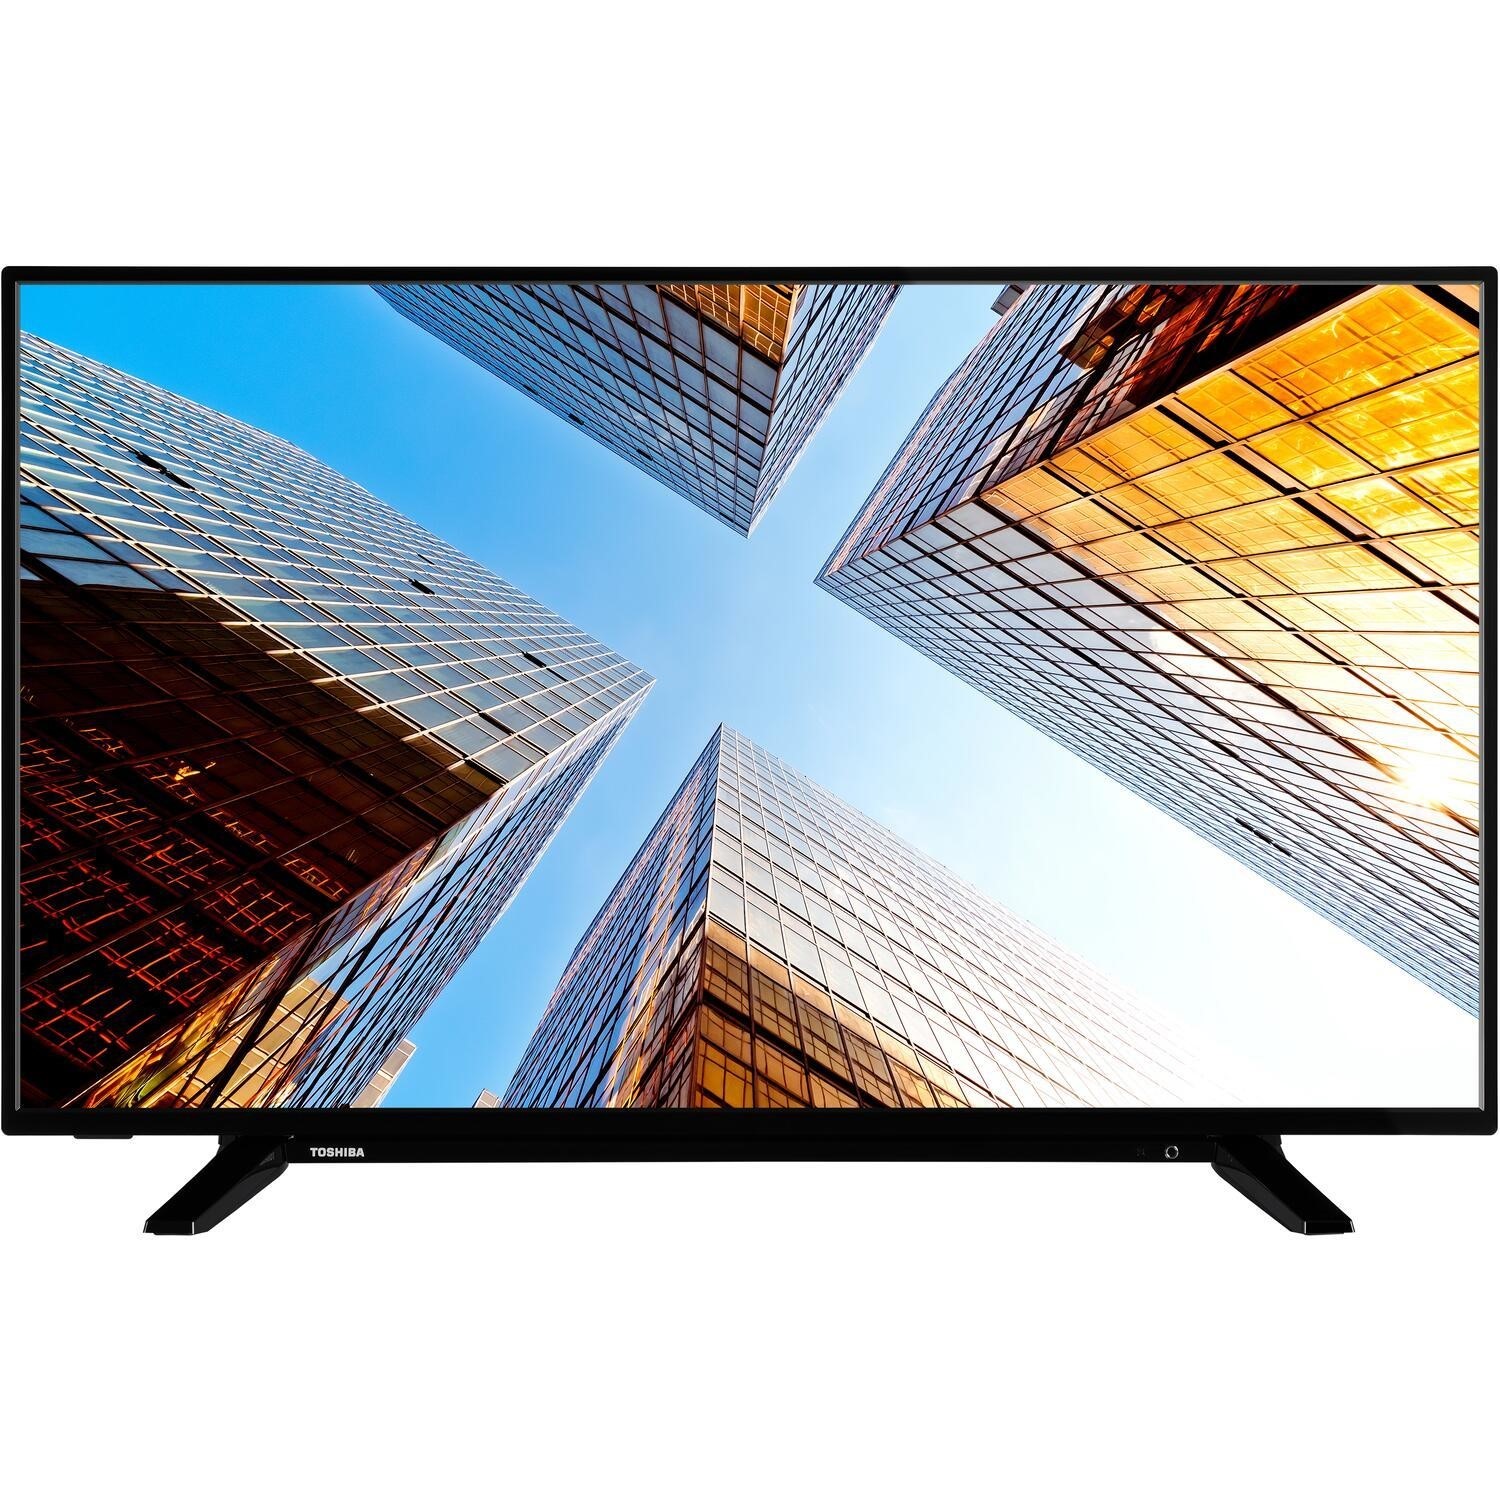 Toshiba 43 Inch 4K Ultra HD HDR Smart LED TV with Google Assistant & Alexa